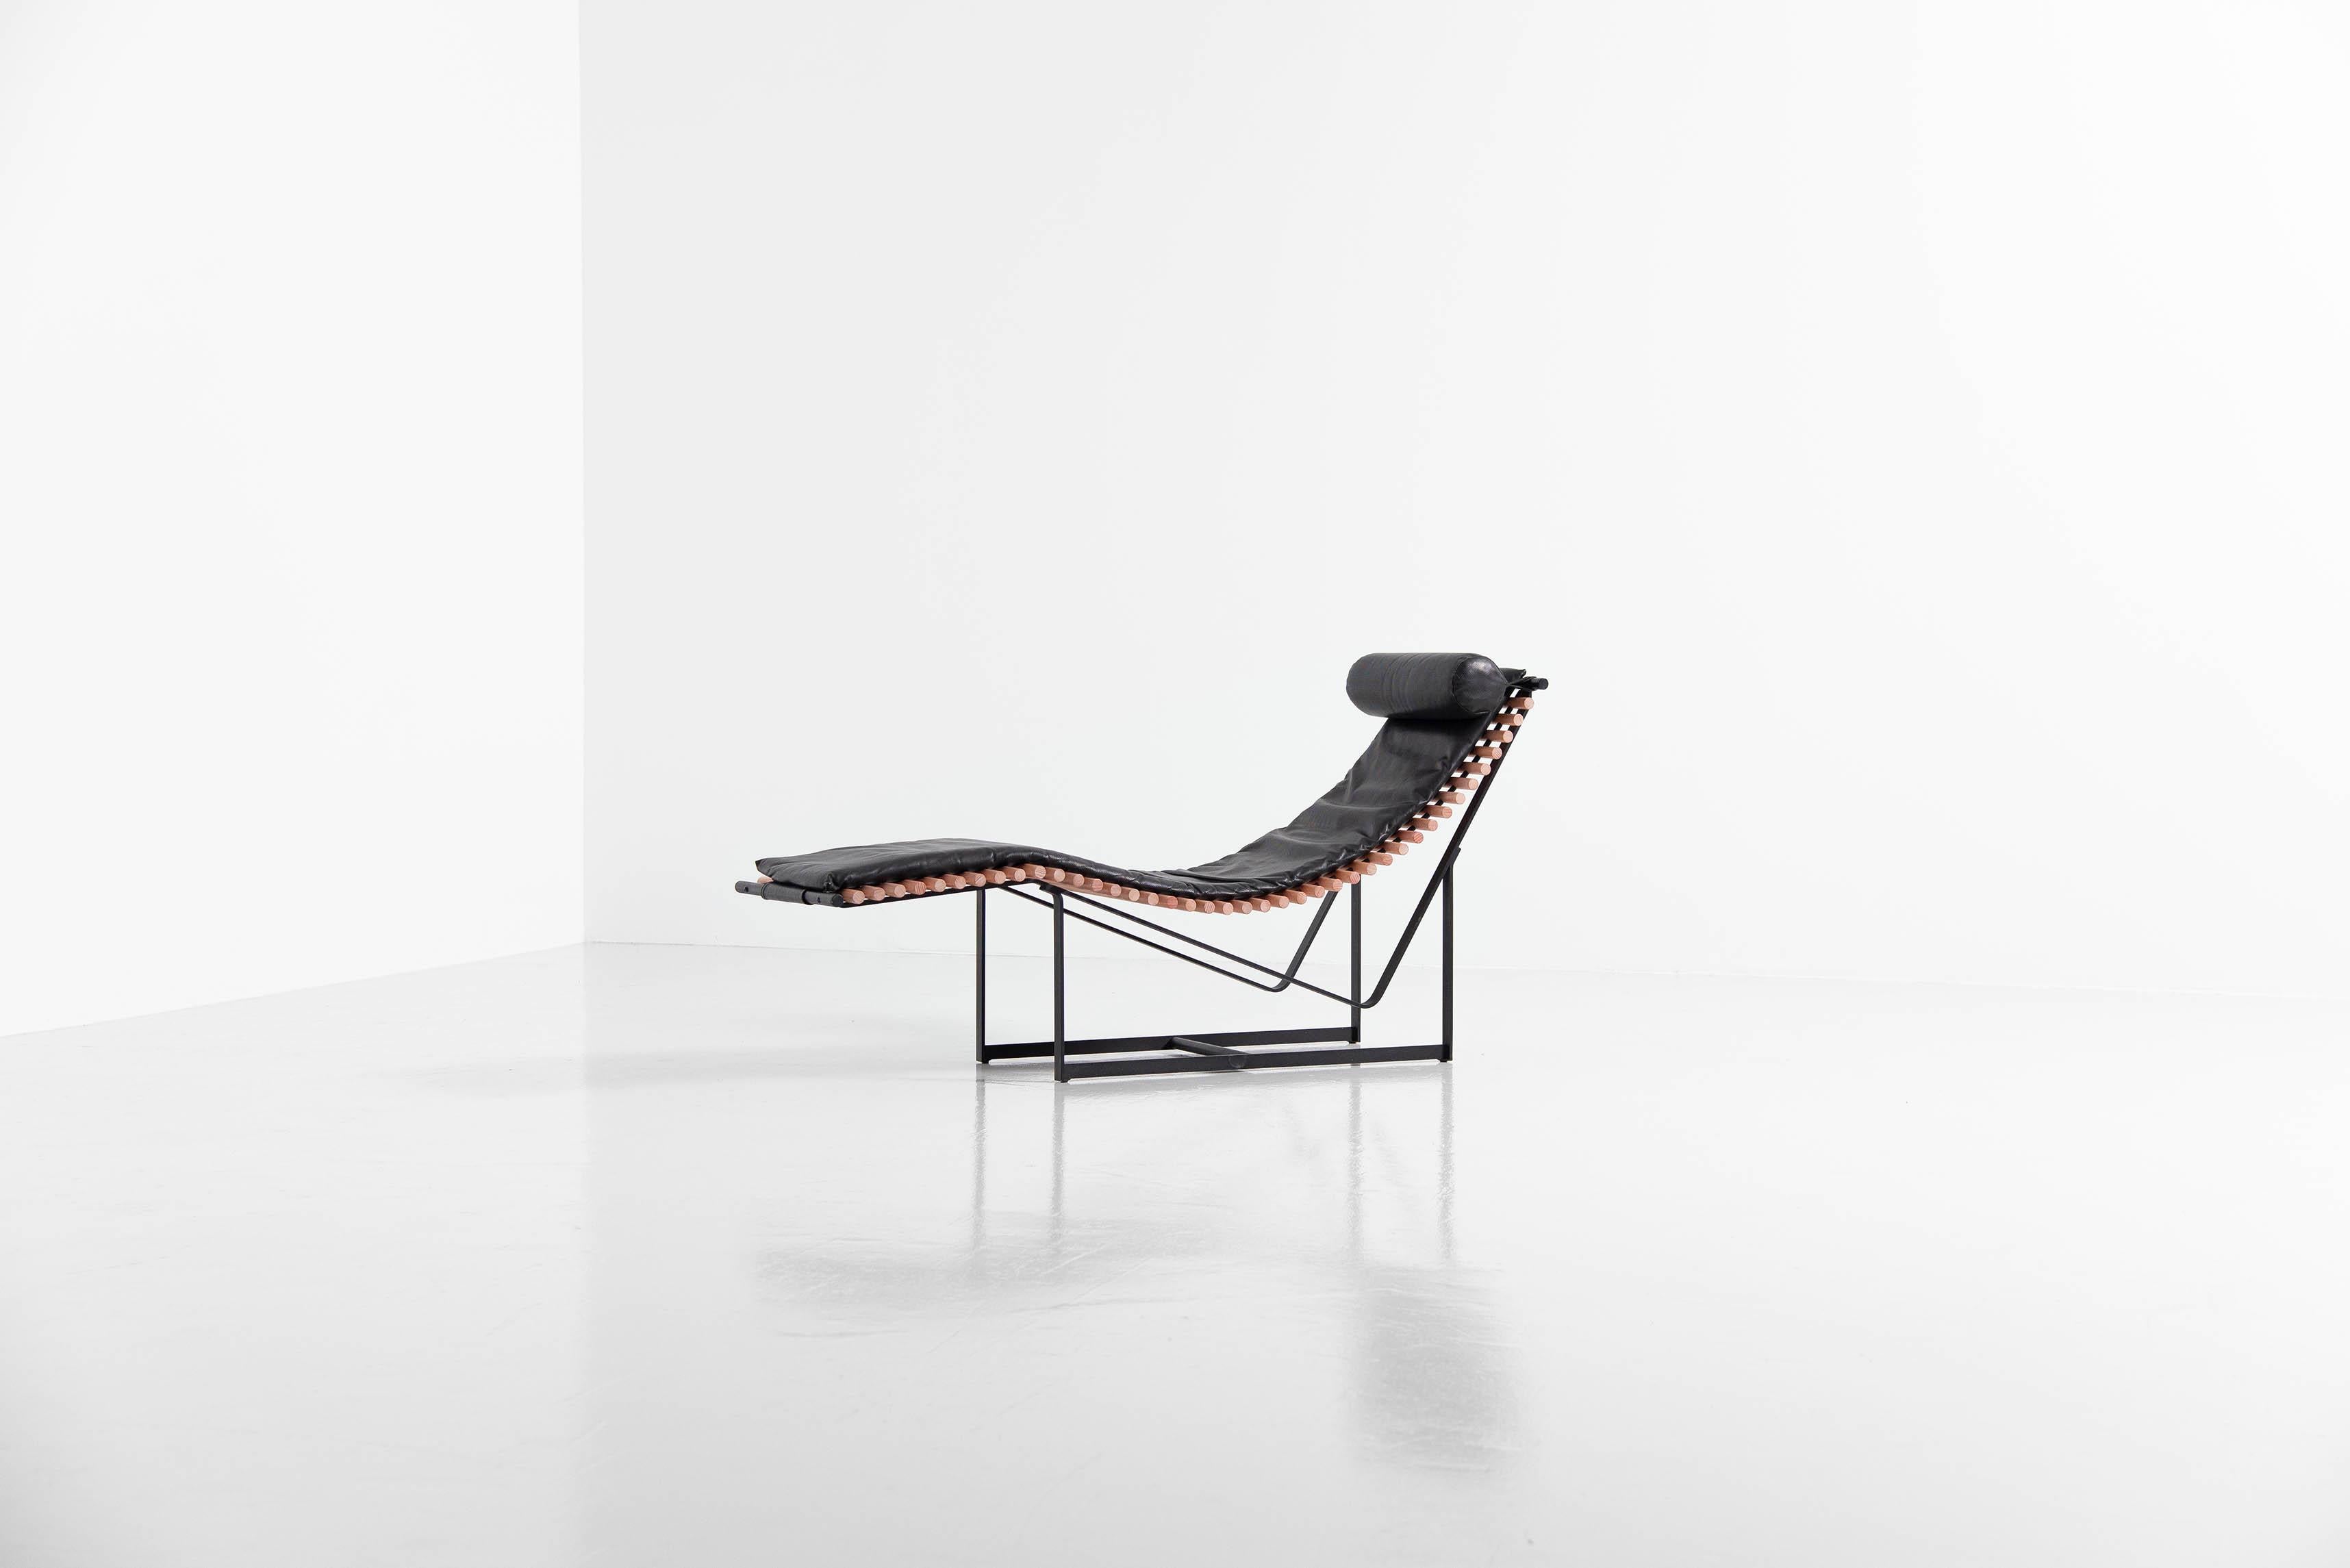 Stunning sculptural shaped lounge chair designed by Peter Strassl, Germany 1978. This super cool shaped lounge chair has solid beech wooden spines which create a skeleton like look. The wood spines create a beautiful shape with the black painted